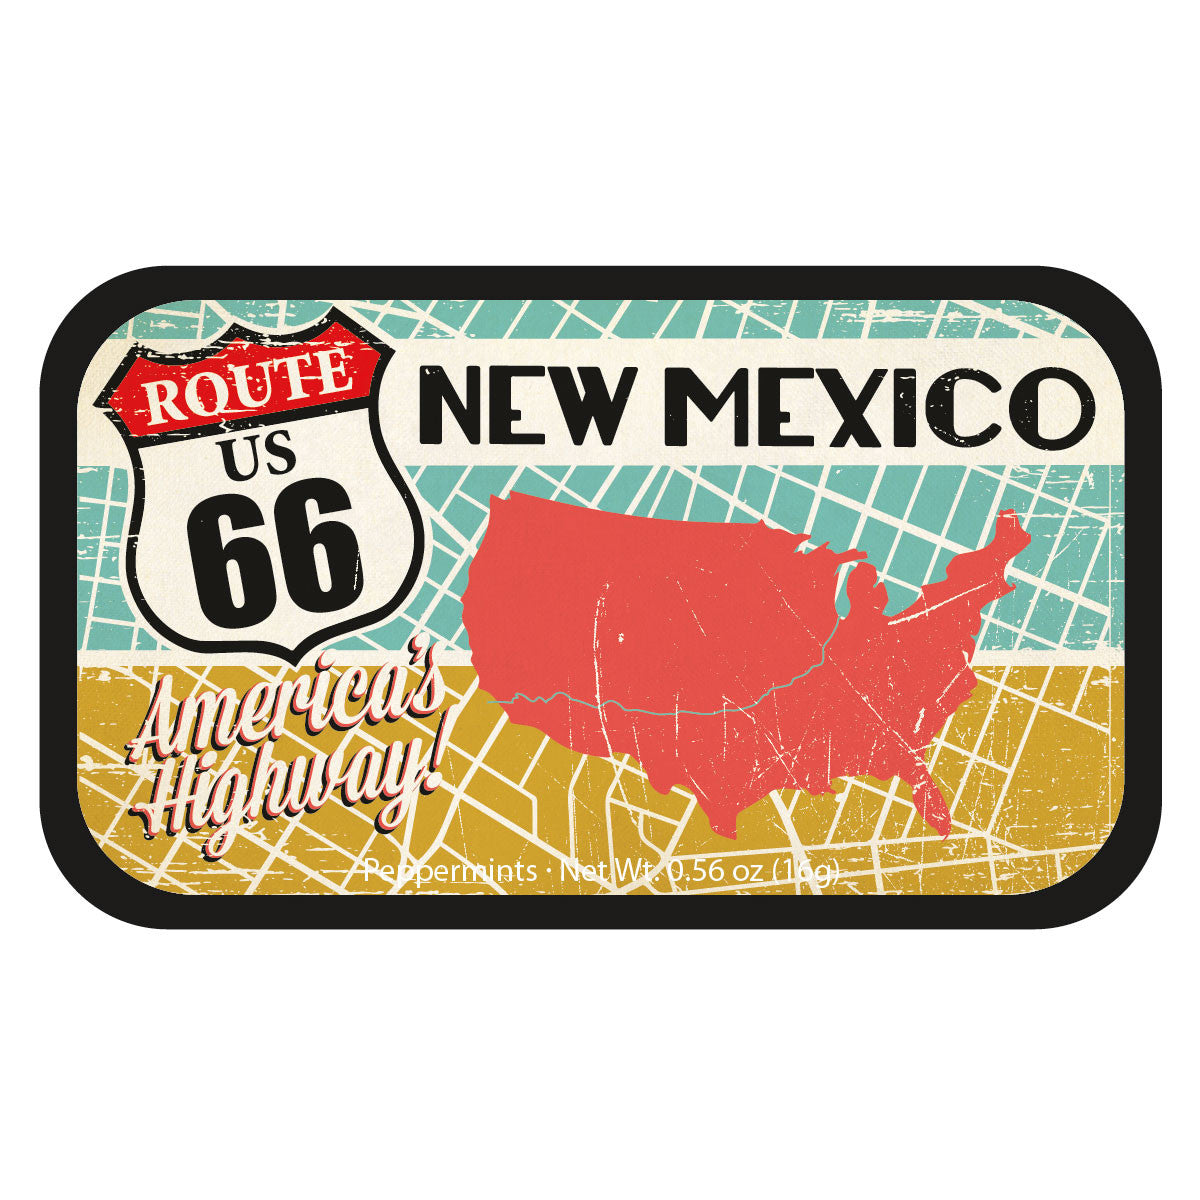 Route 66 Map New Mexico - 1290S